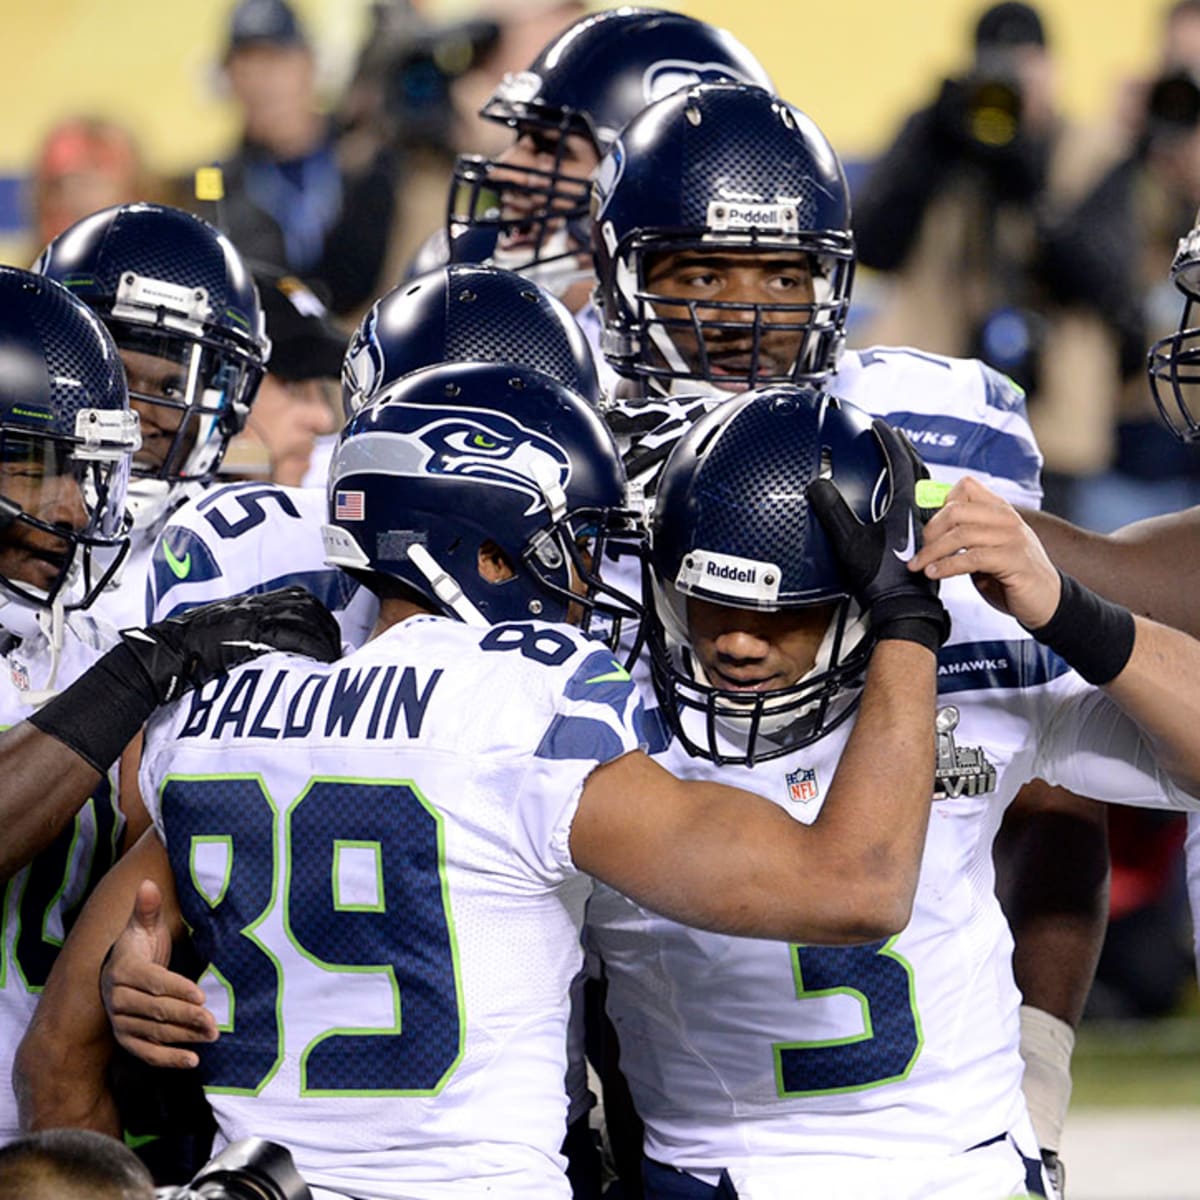 A look back on the Super Bowl 48 champion Seahawks - Sports